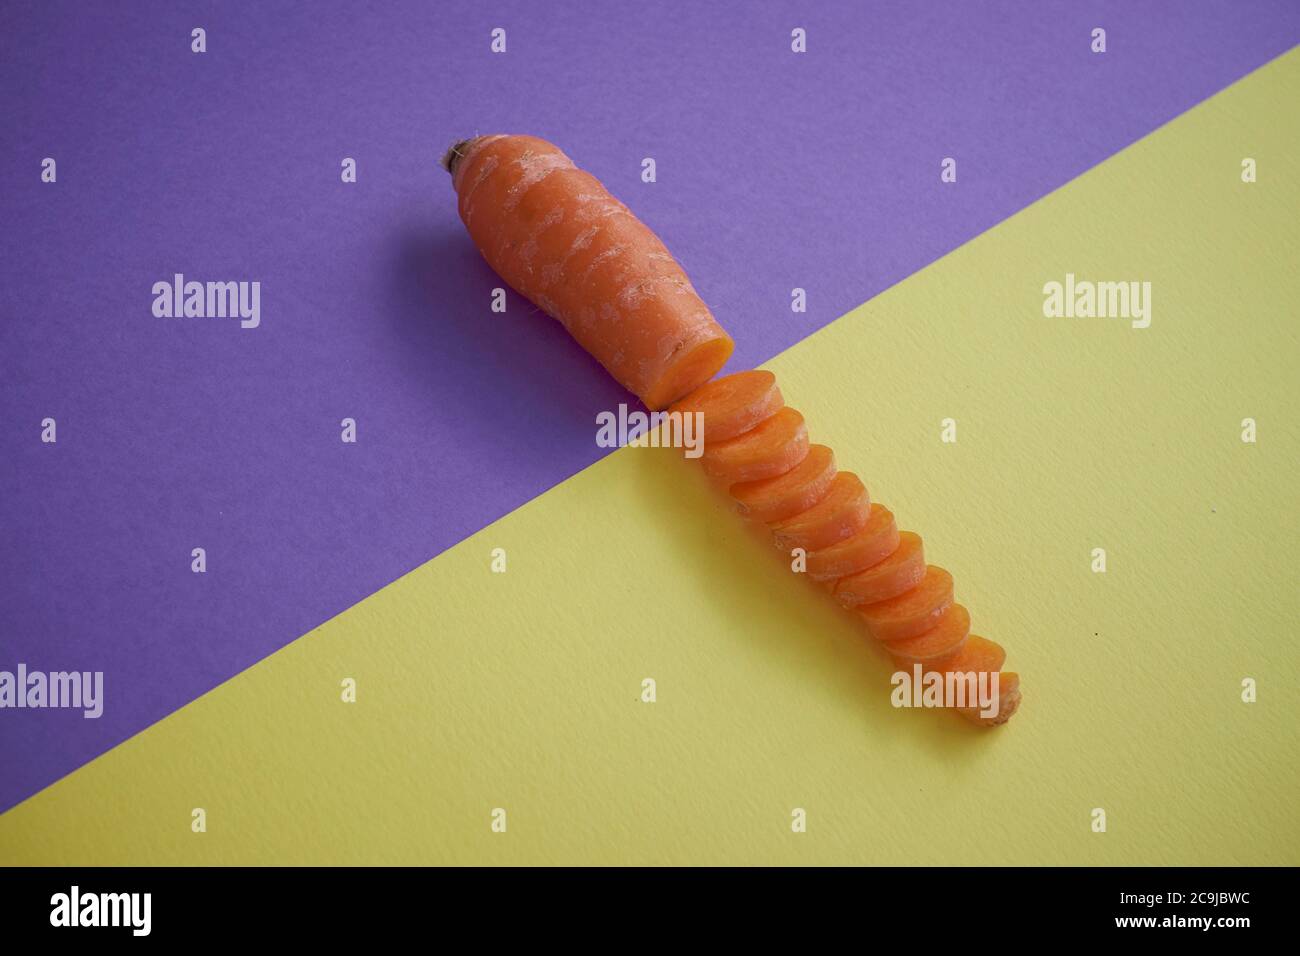 Carrot against a purple and yellow background. Stock Photo